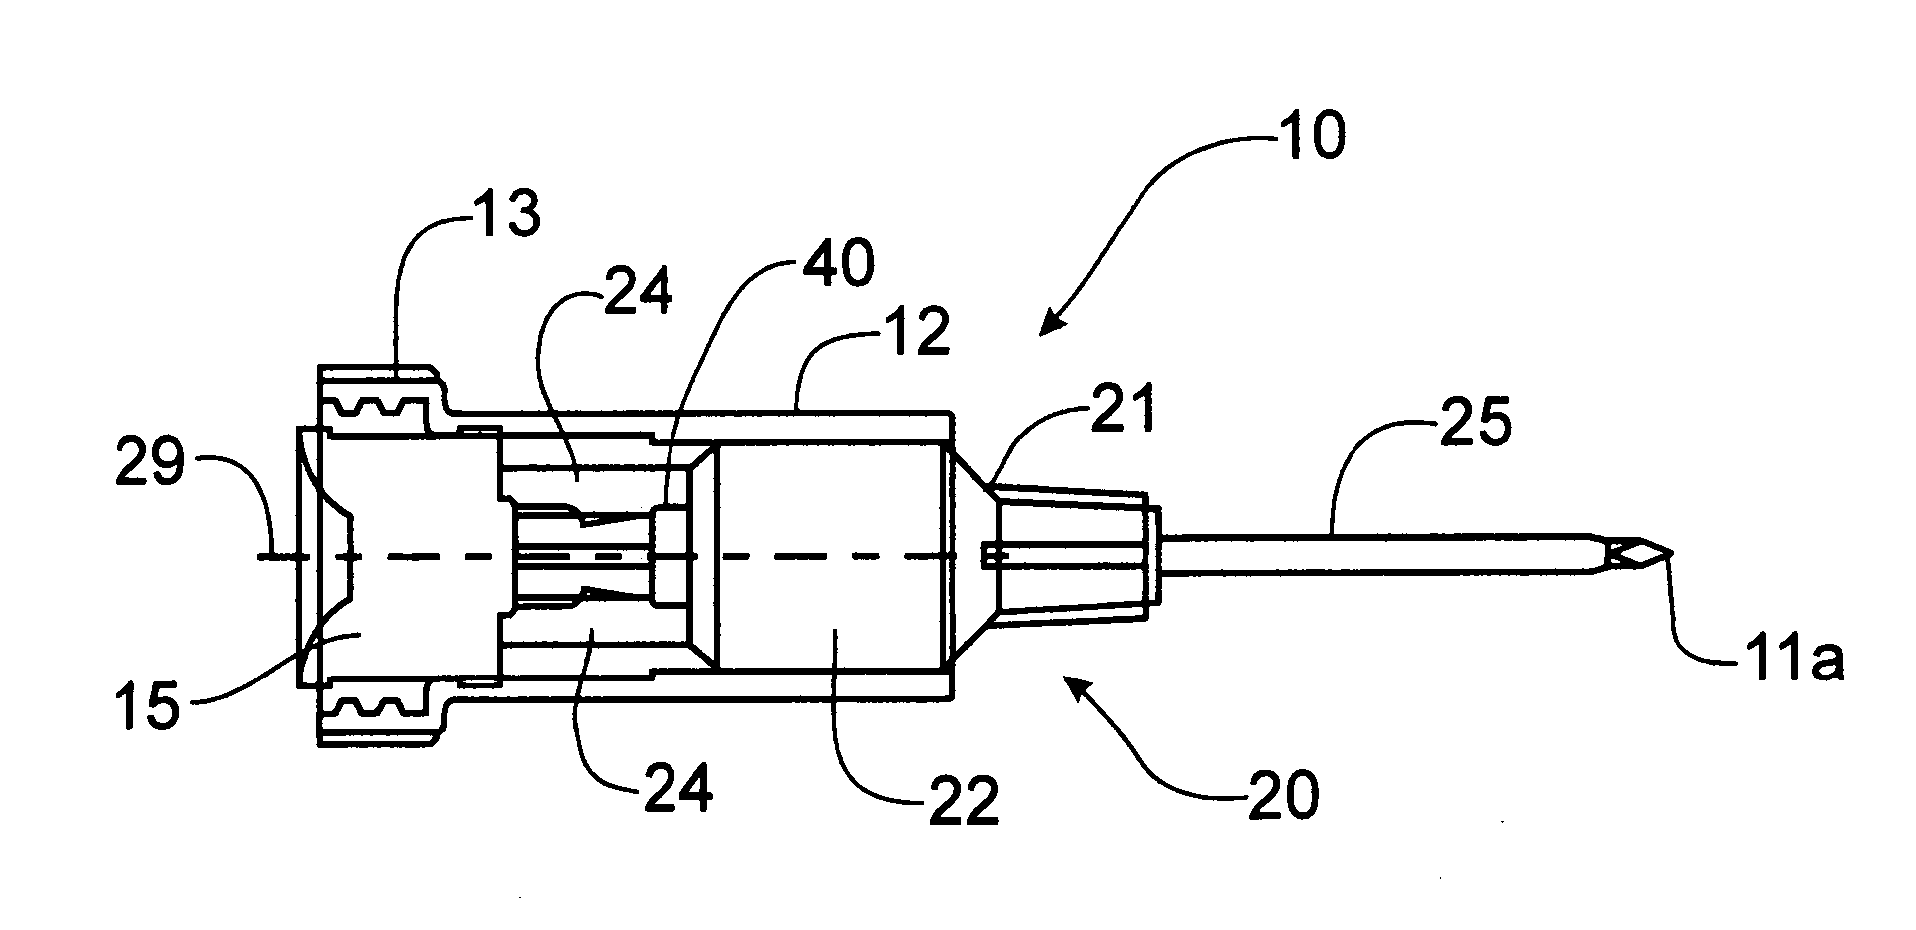 Lock apparatus for a safety needle assembly